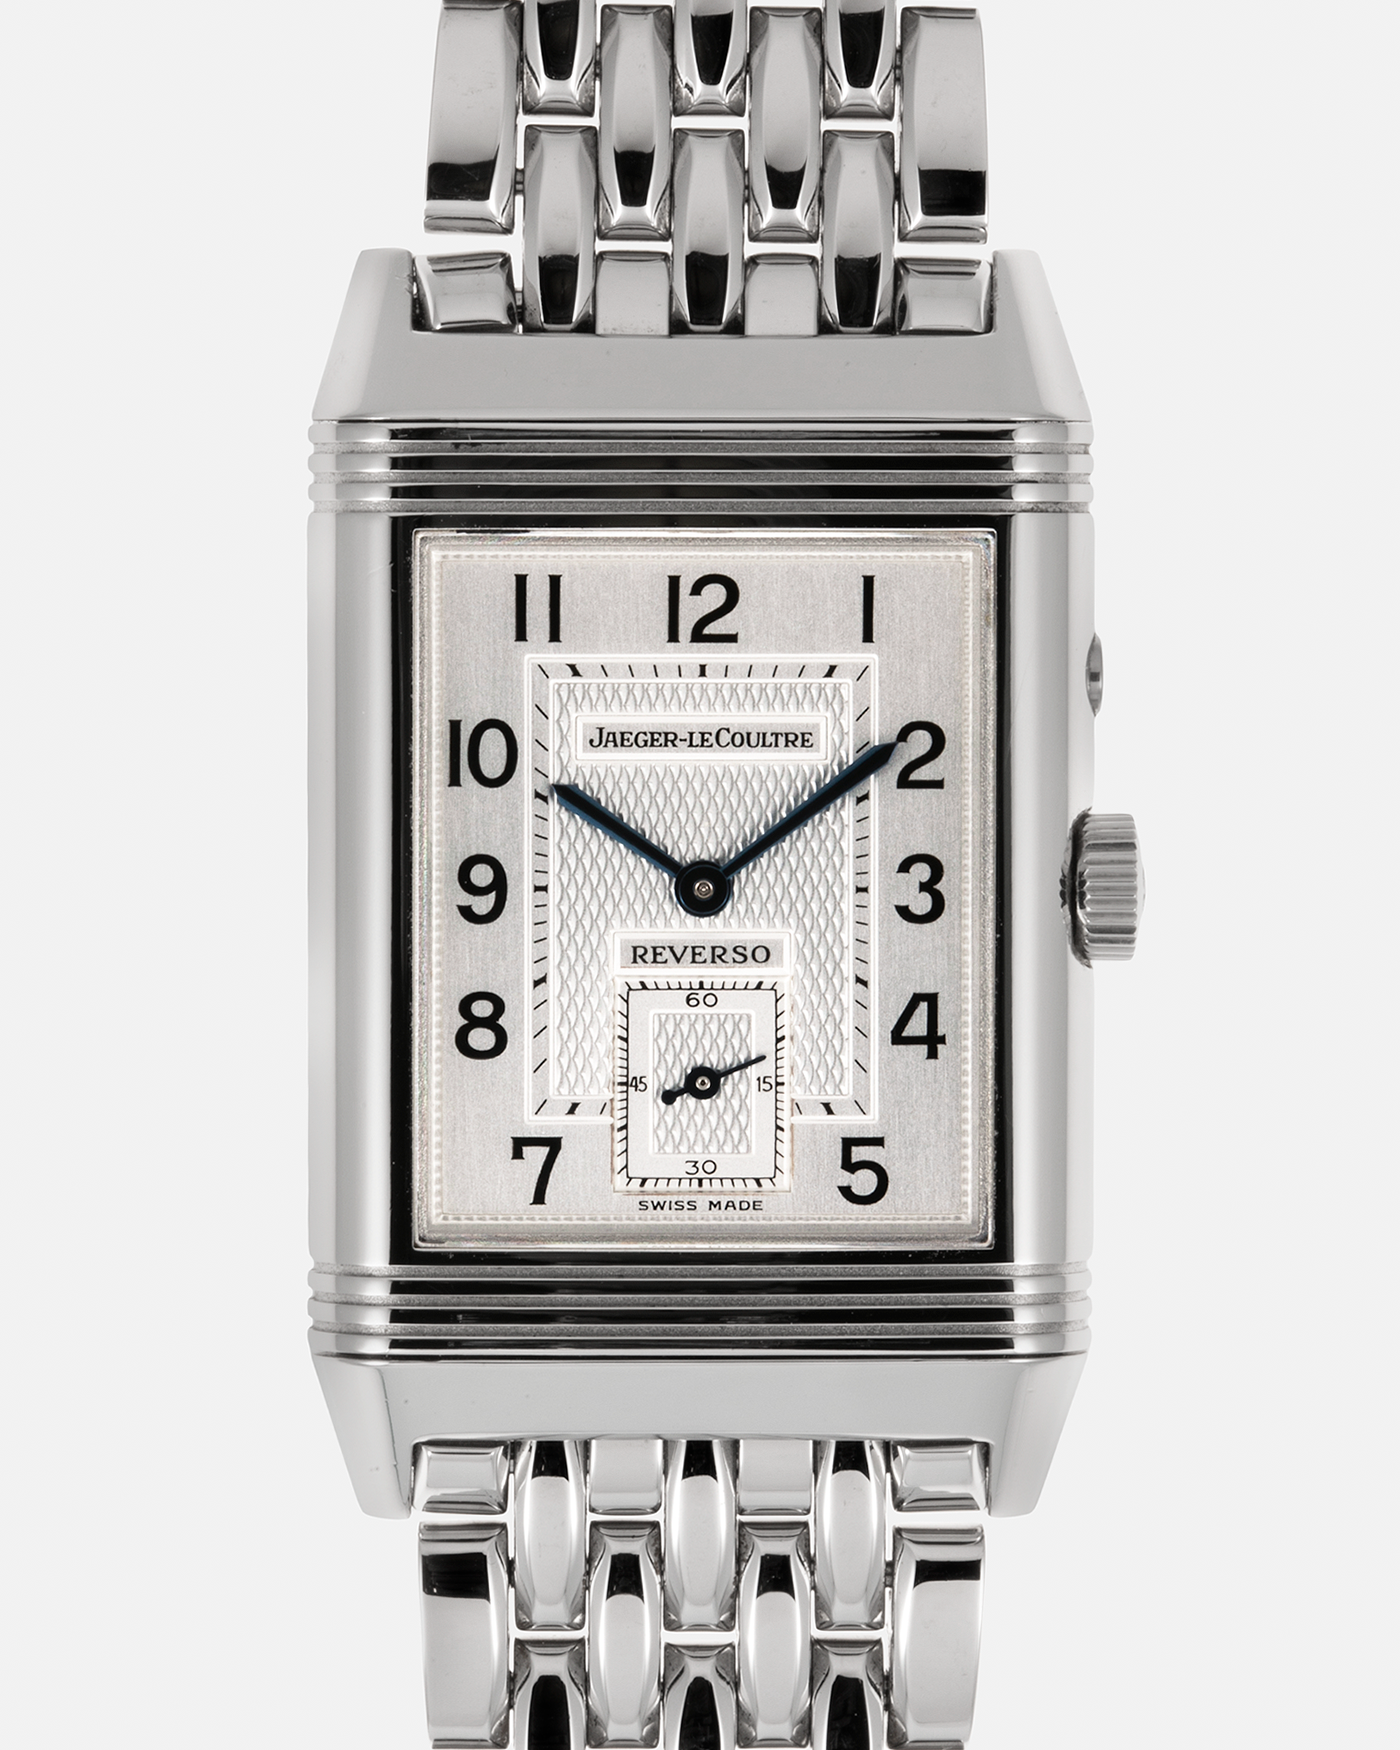 Brand: Jaeger LeCoultre Year: 2011 Model: Reverso Duoface Japan Edition Blue, Limited Edition of 300 Pieces Reference Number: 270.8.54 Material: Stainless Steel Movement: Jaeger LeCoultre Cal. 854, Manual-Wind Case Diameter: 42mm x 26mm Lug Width: 19mm Bracelet/Strap: Jaeger LeCoultre Stainless Steel Bracelet, additional Jaeger LeCoultre Black Alligator Leather Strap with Signed Stainless Steel Deployant Clasp